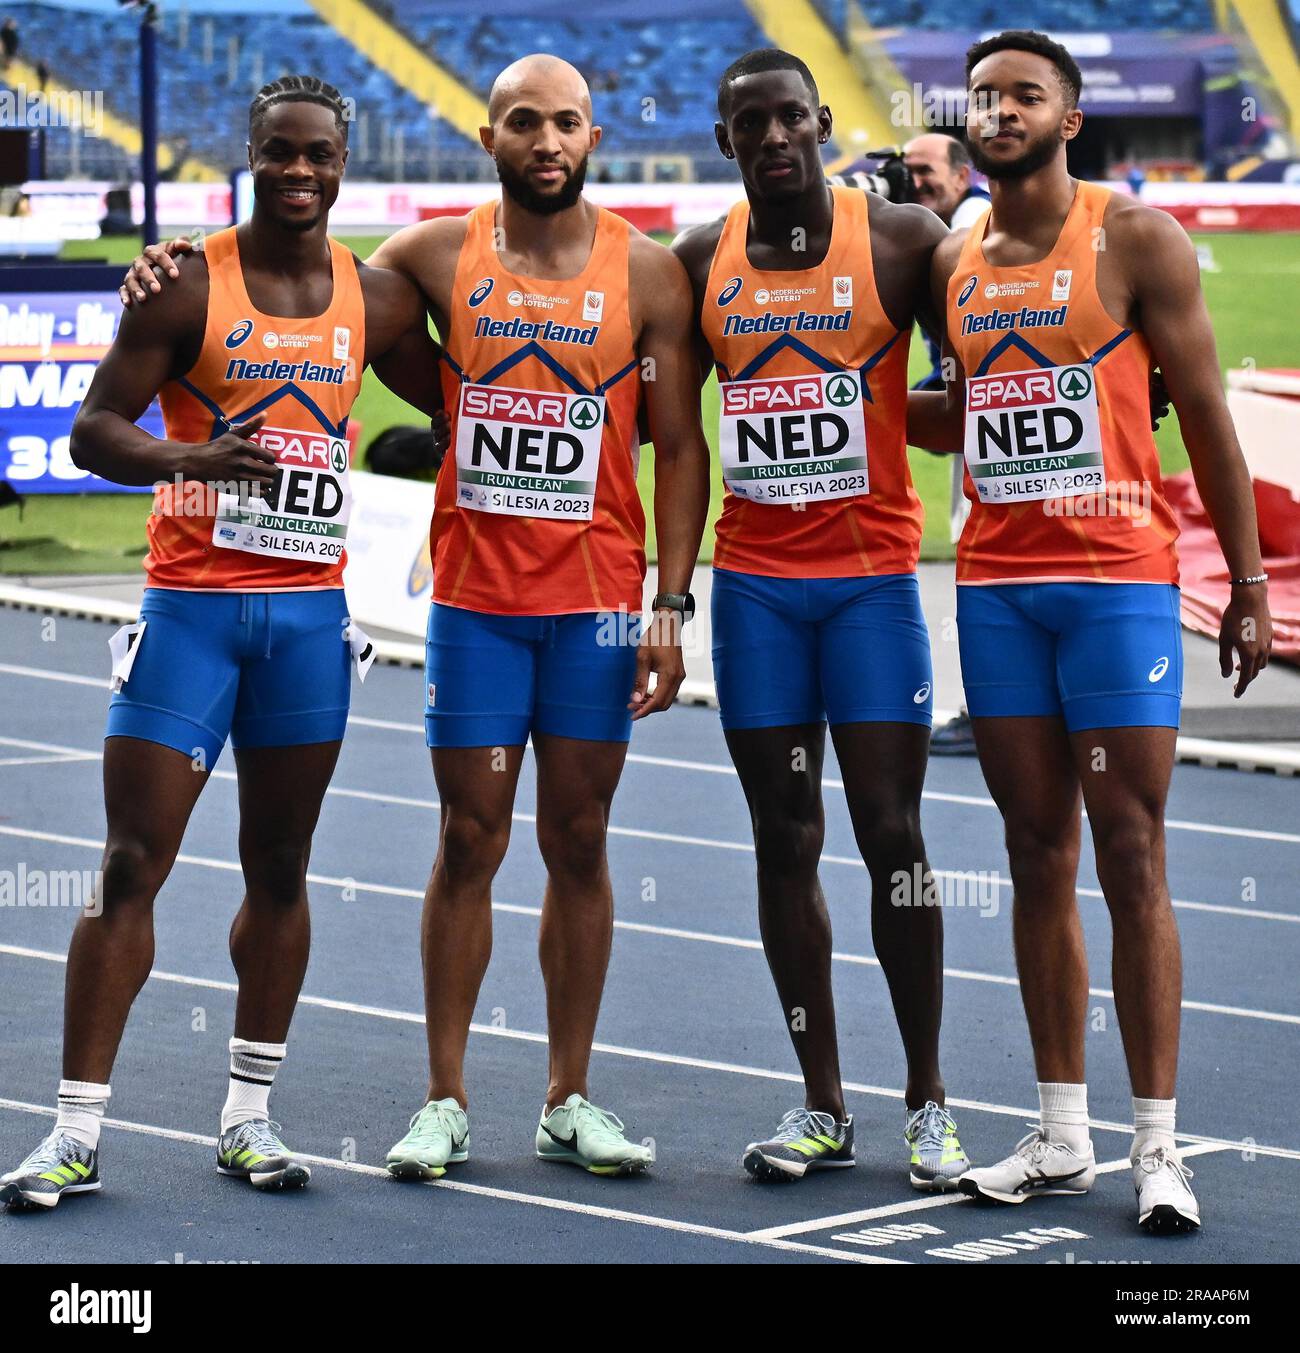 CHORZOW, POLAND - JUNE 24: (L-R) Raphael Bouju, Hensley Paulina, Taymir Burnet and Xavi Mo-Ajok of Netherlands pose for a photo after placing third in Stock Photo